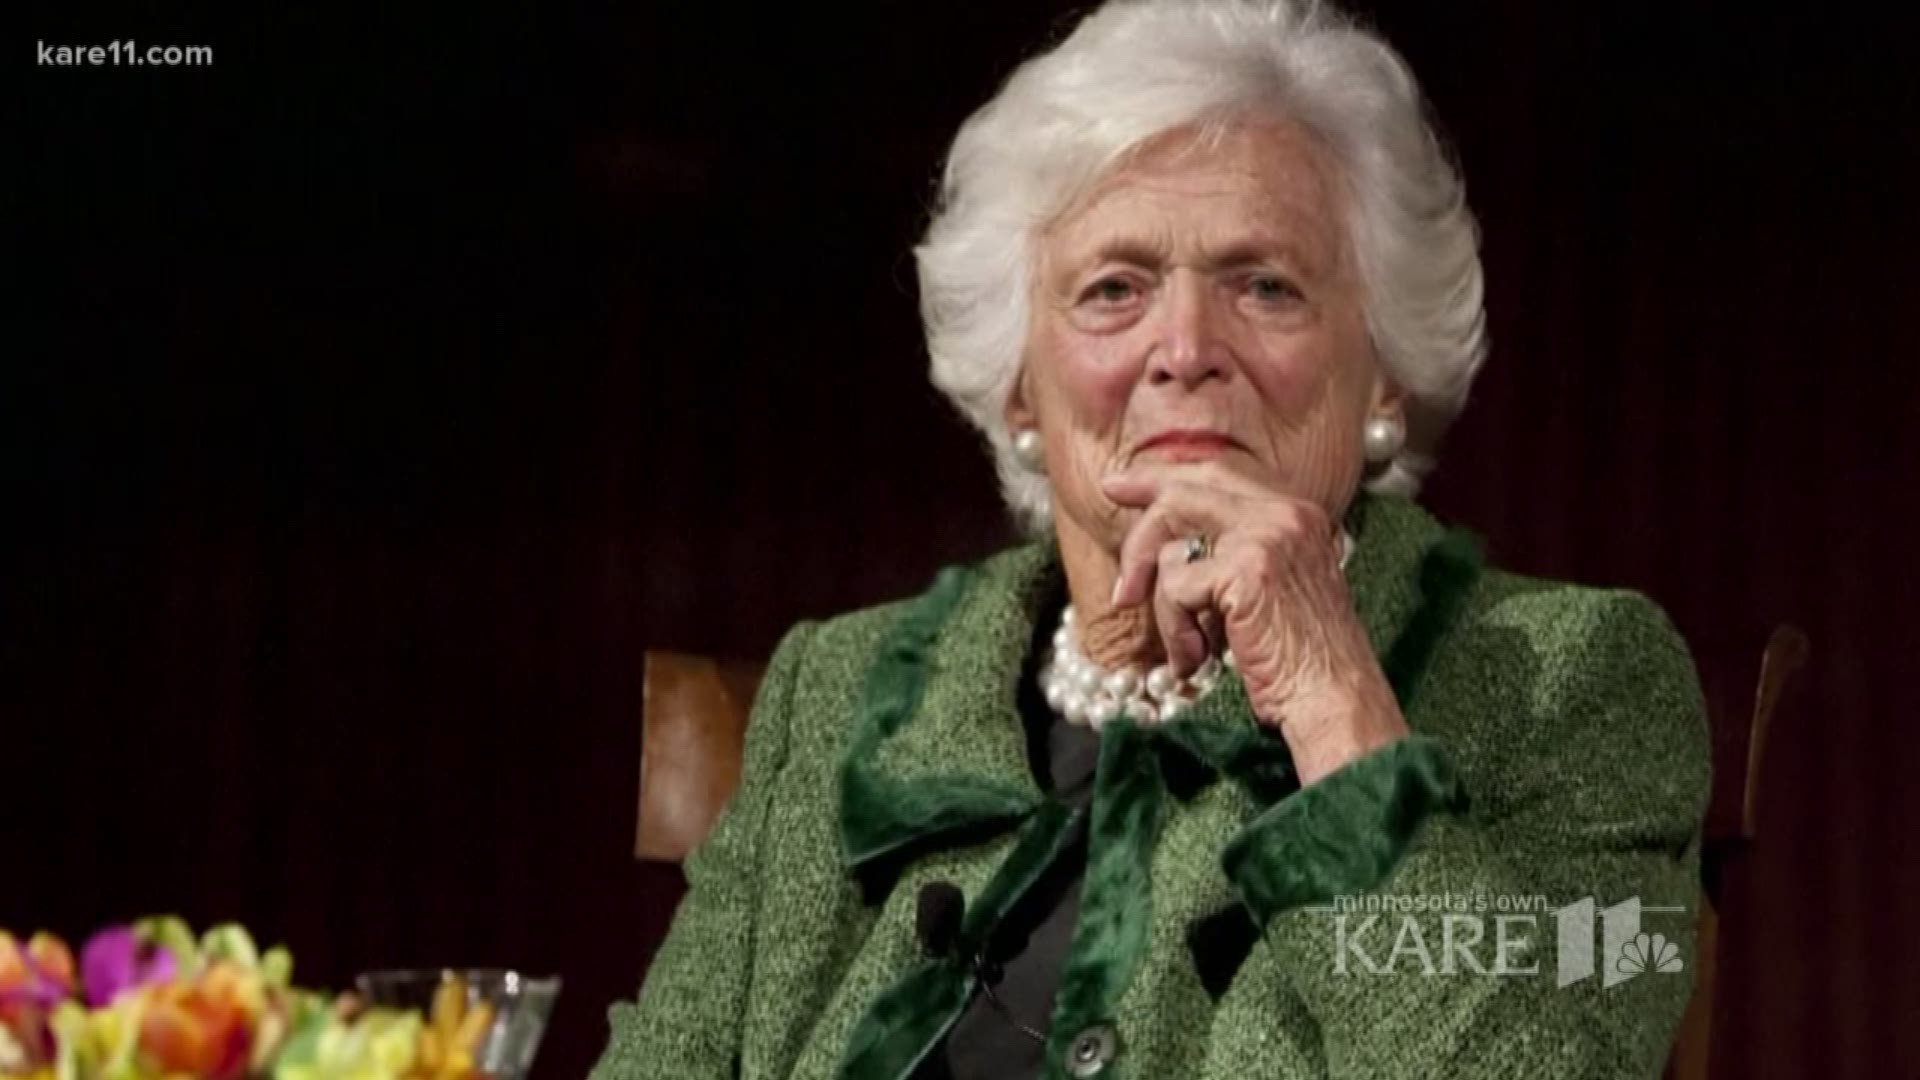 The recent decision of former First Lady Barbara Bush to stop measures that would prolong her life has sparked a nationwide discussion on 'comfort care.'